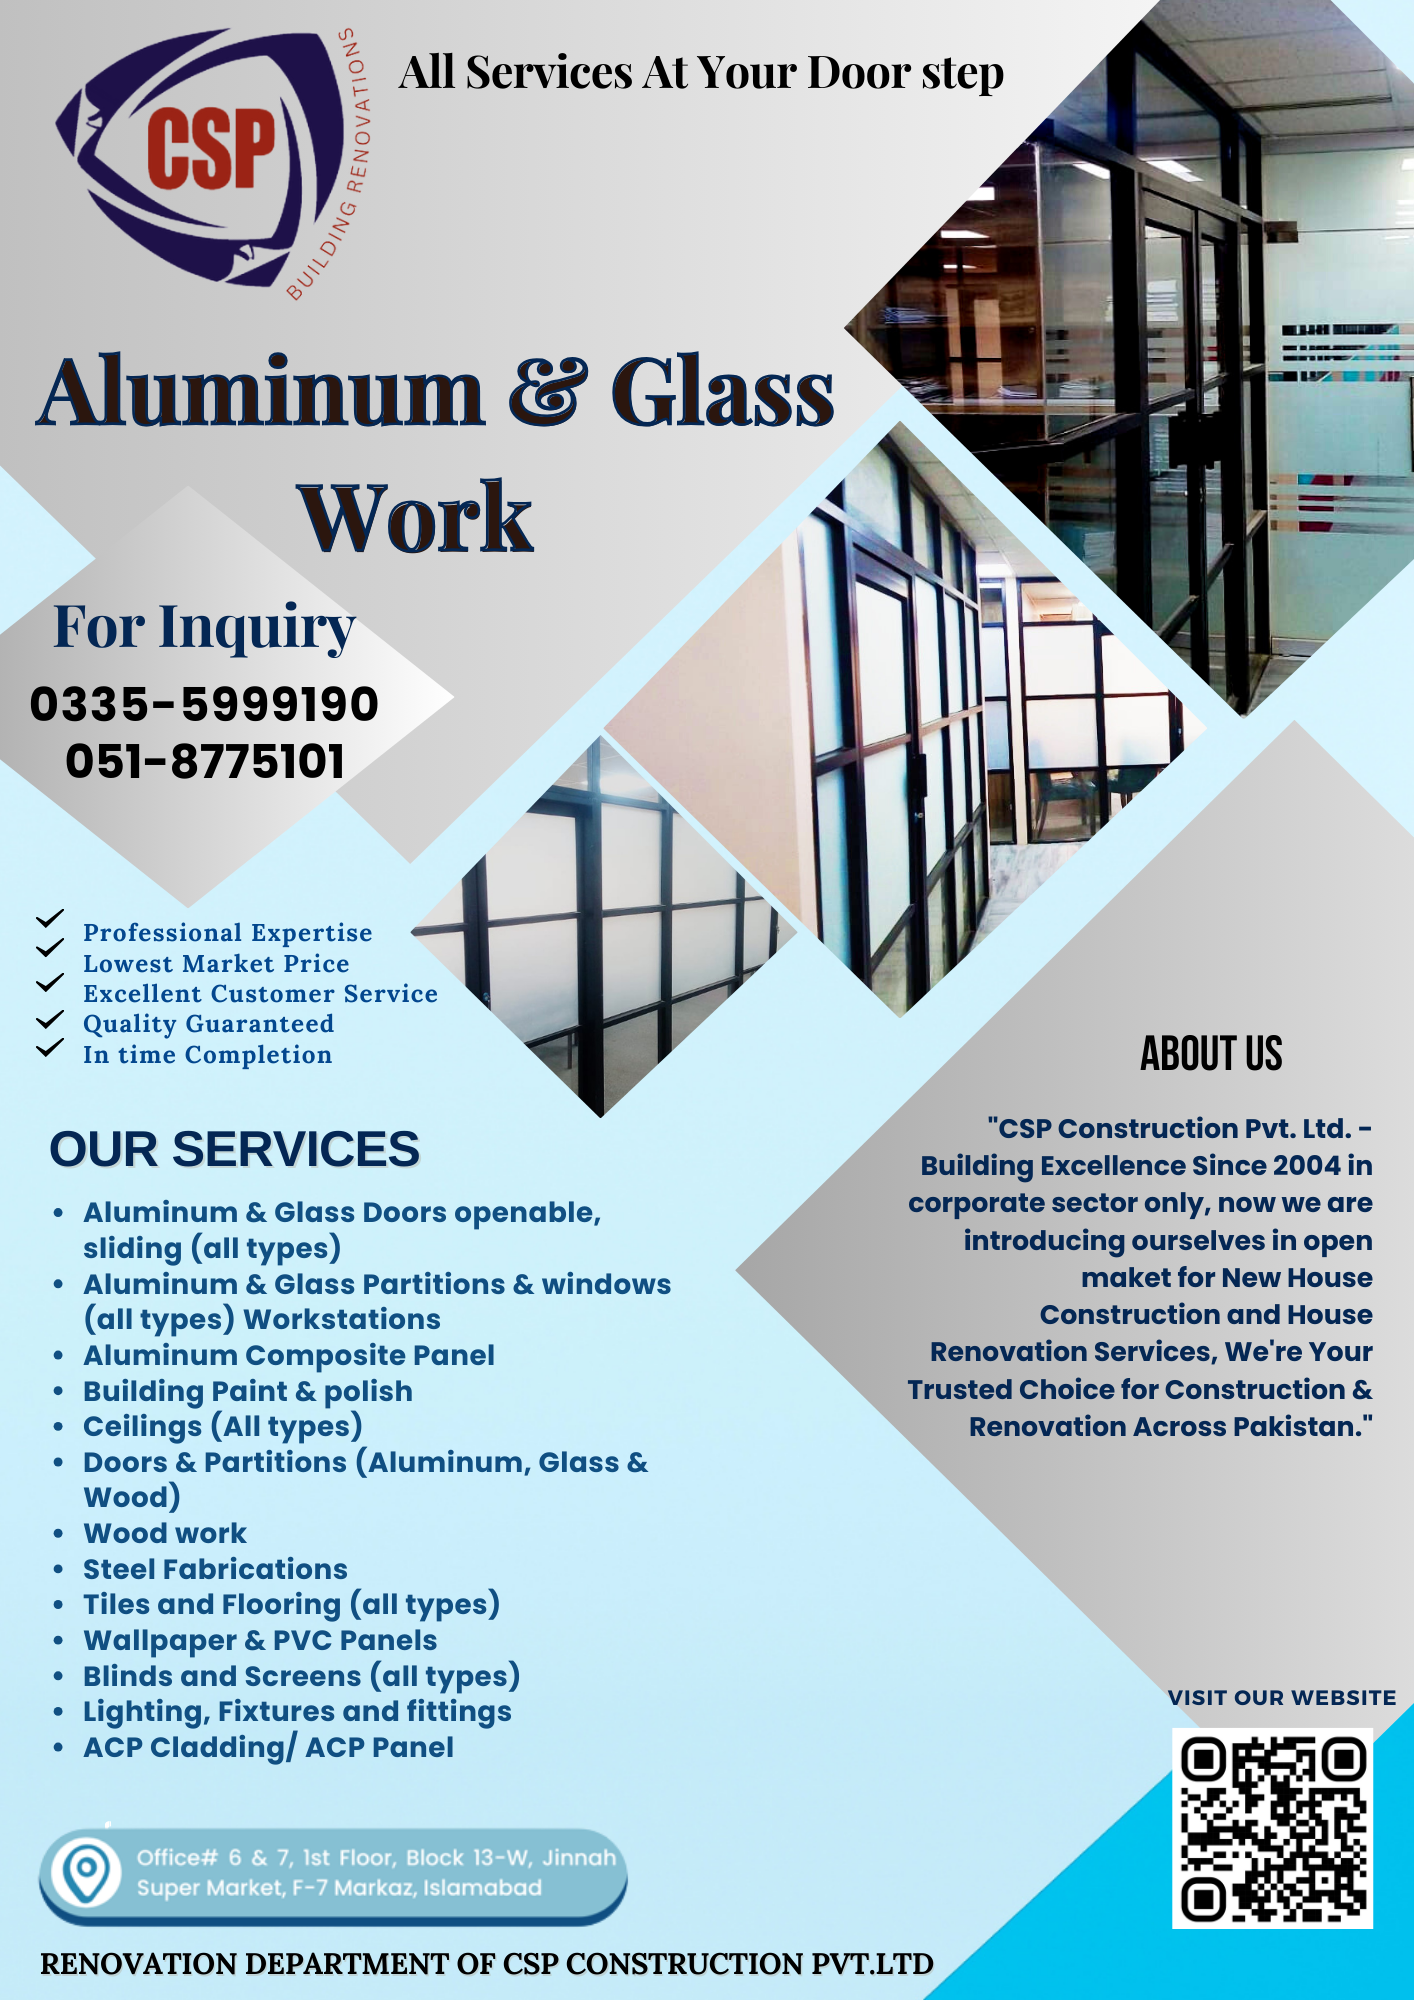 images/services/Aluminum_&_Glass_Work.png